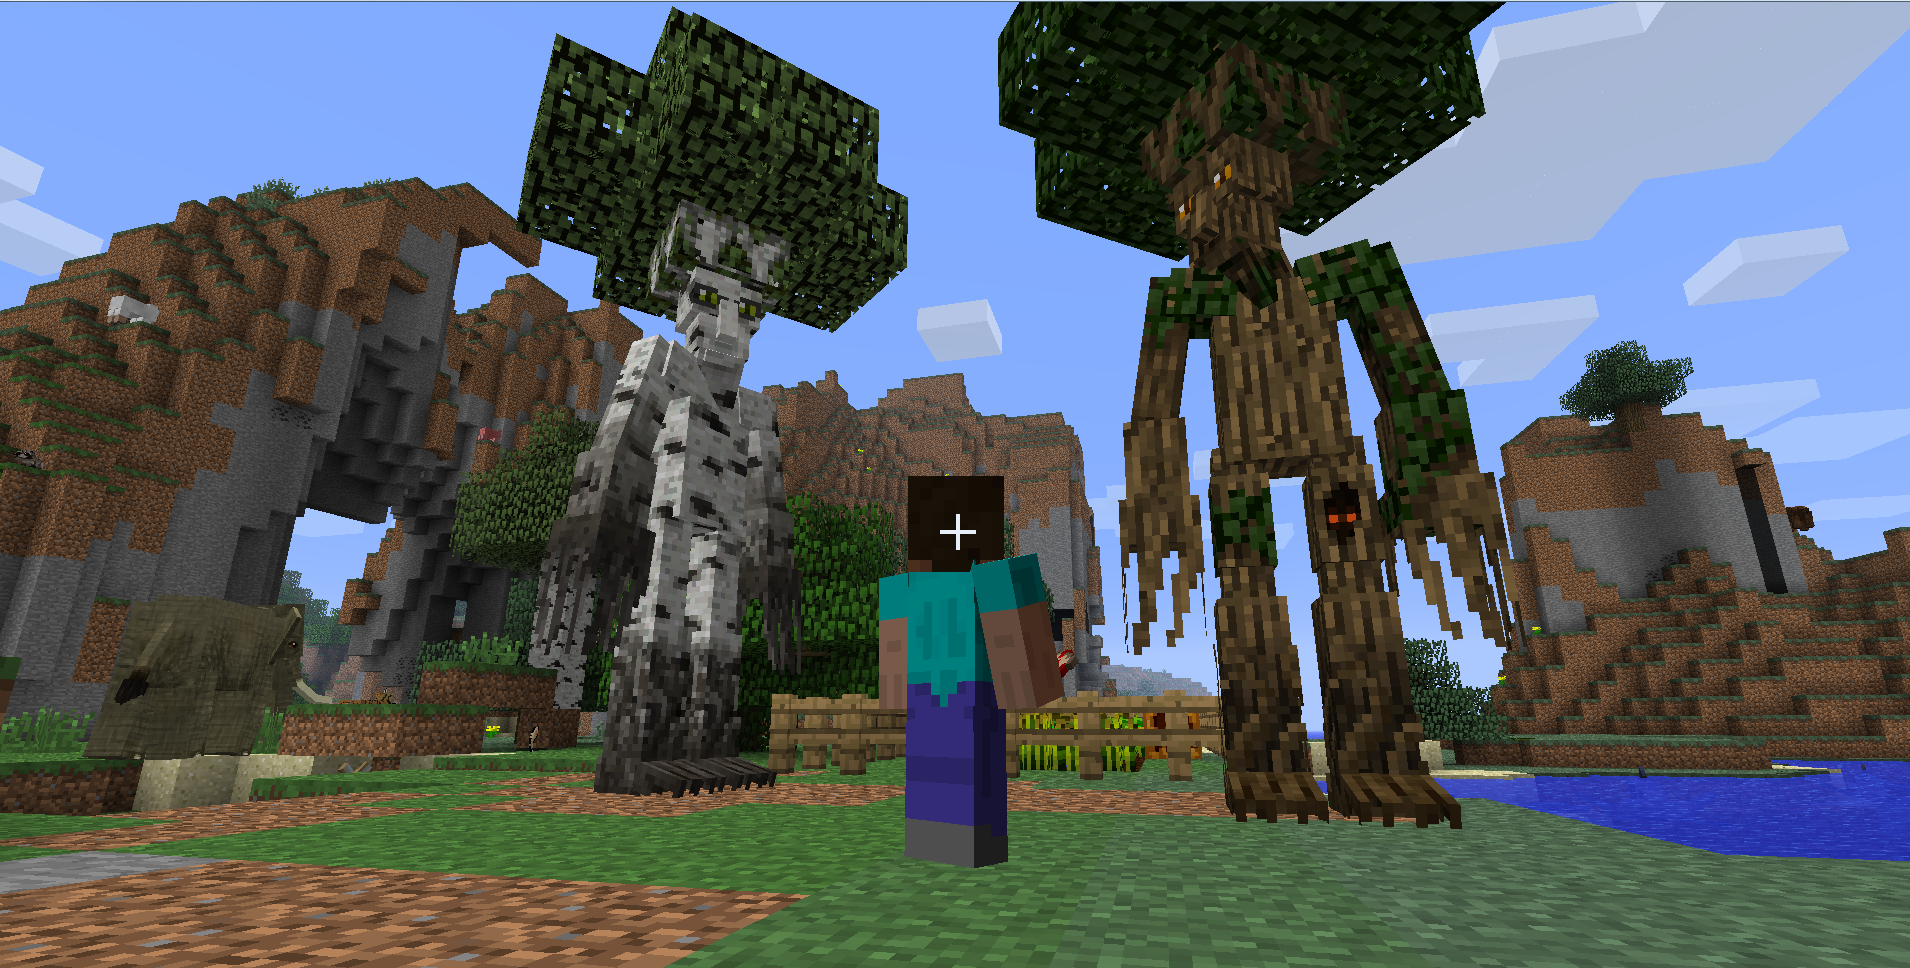 https://www.6minecraft.net/wp-content/uploads/2015/06/Ents-in-Minecraft.png